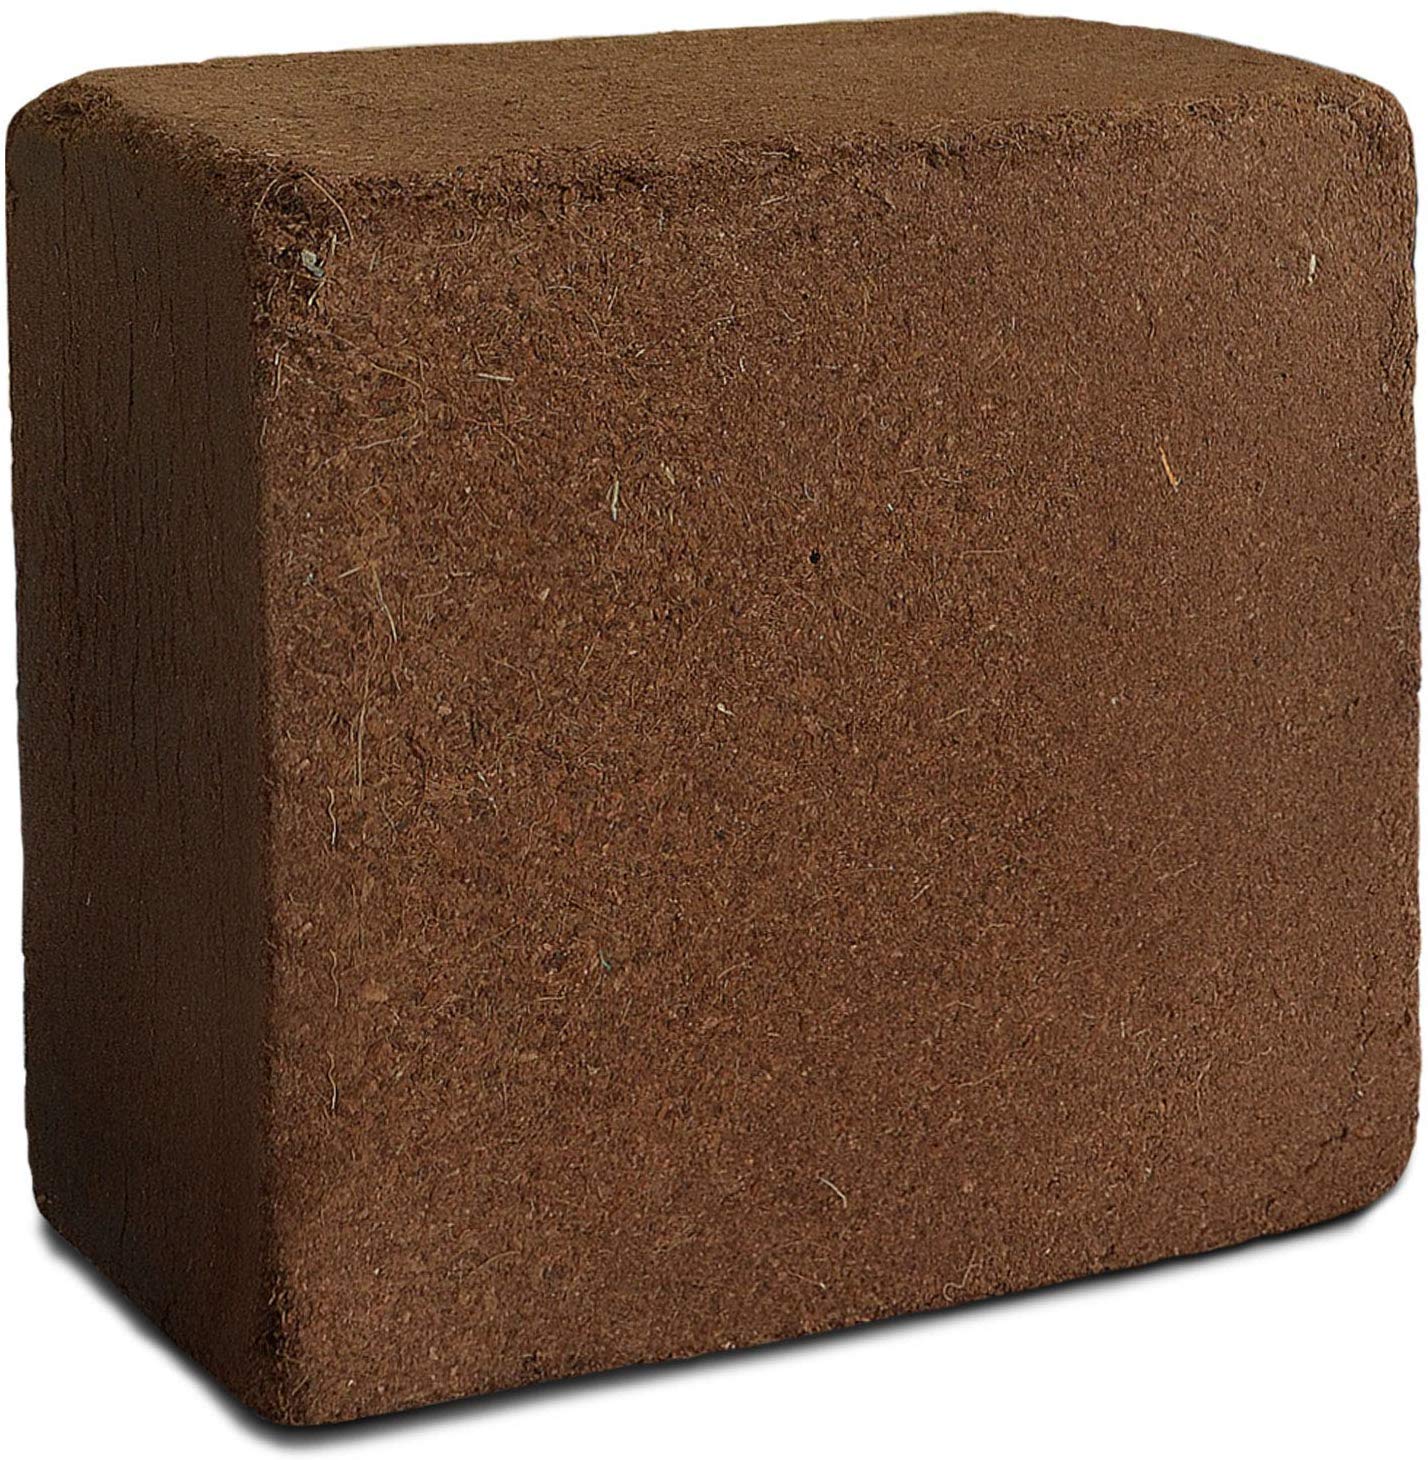 ebbstone agro peat/coco peat cocopeat block 0.8kg to1kg expands up to 5 litres of coco peat powder